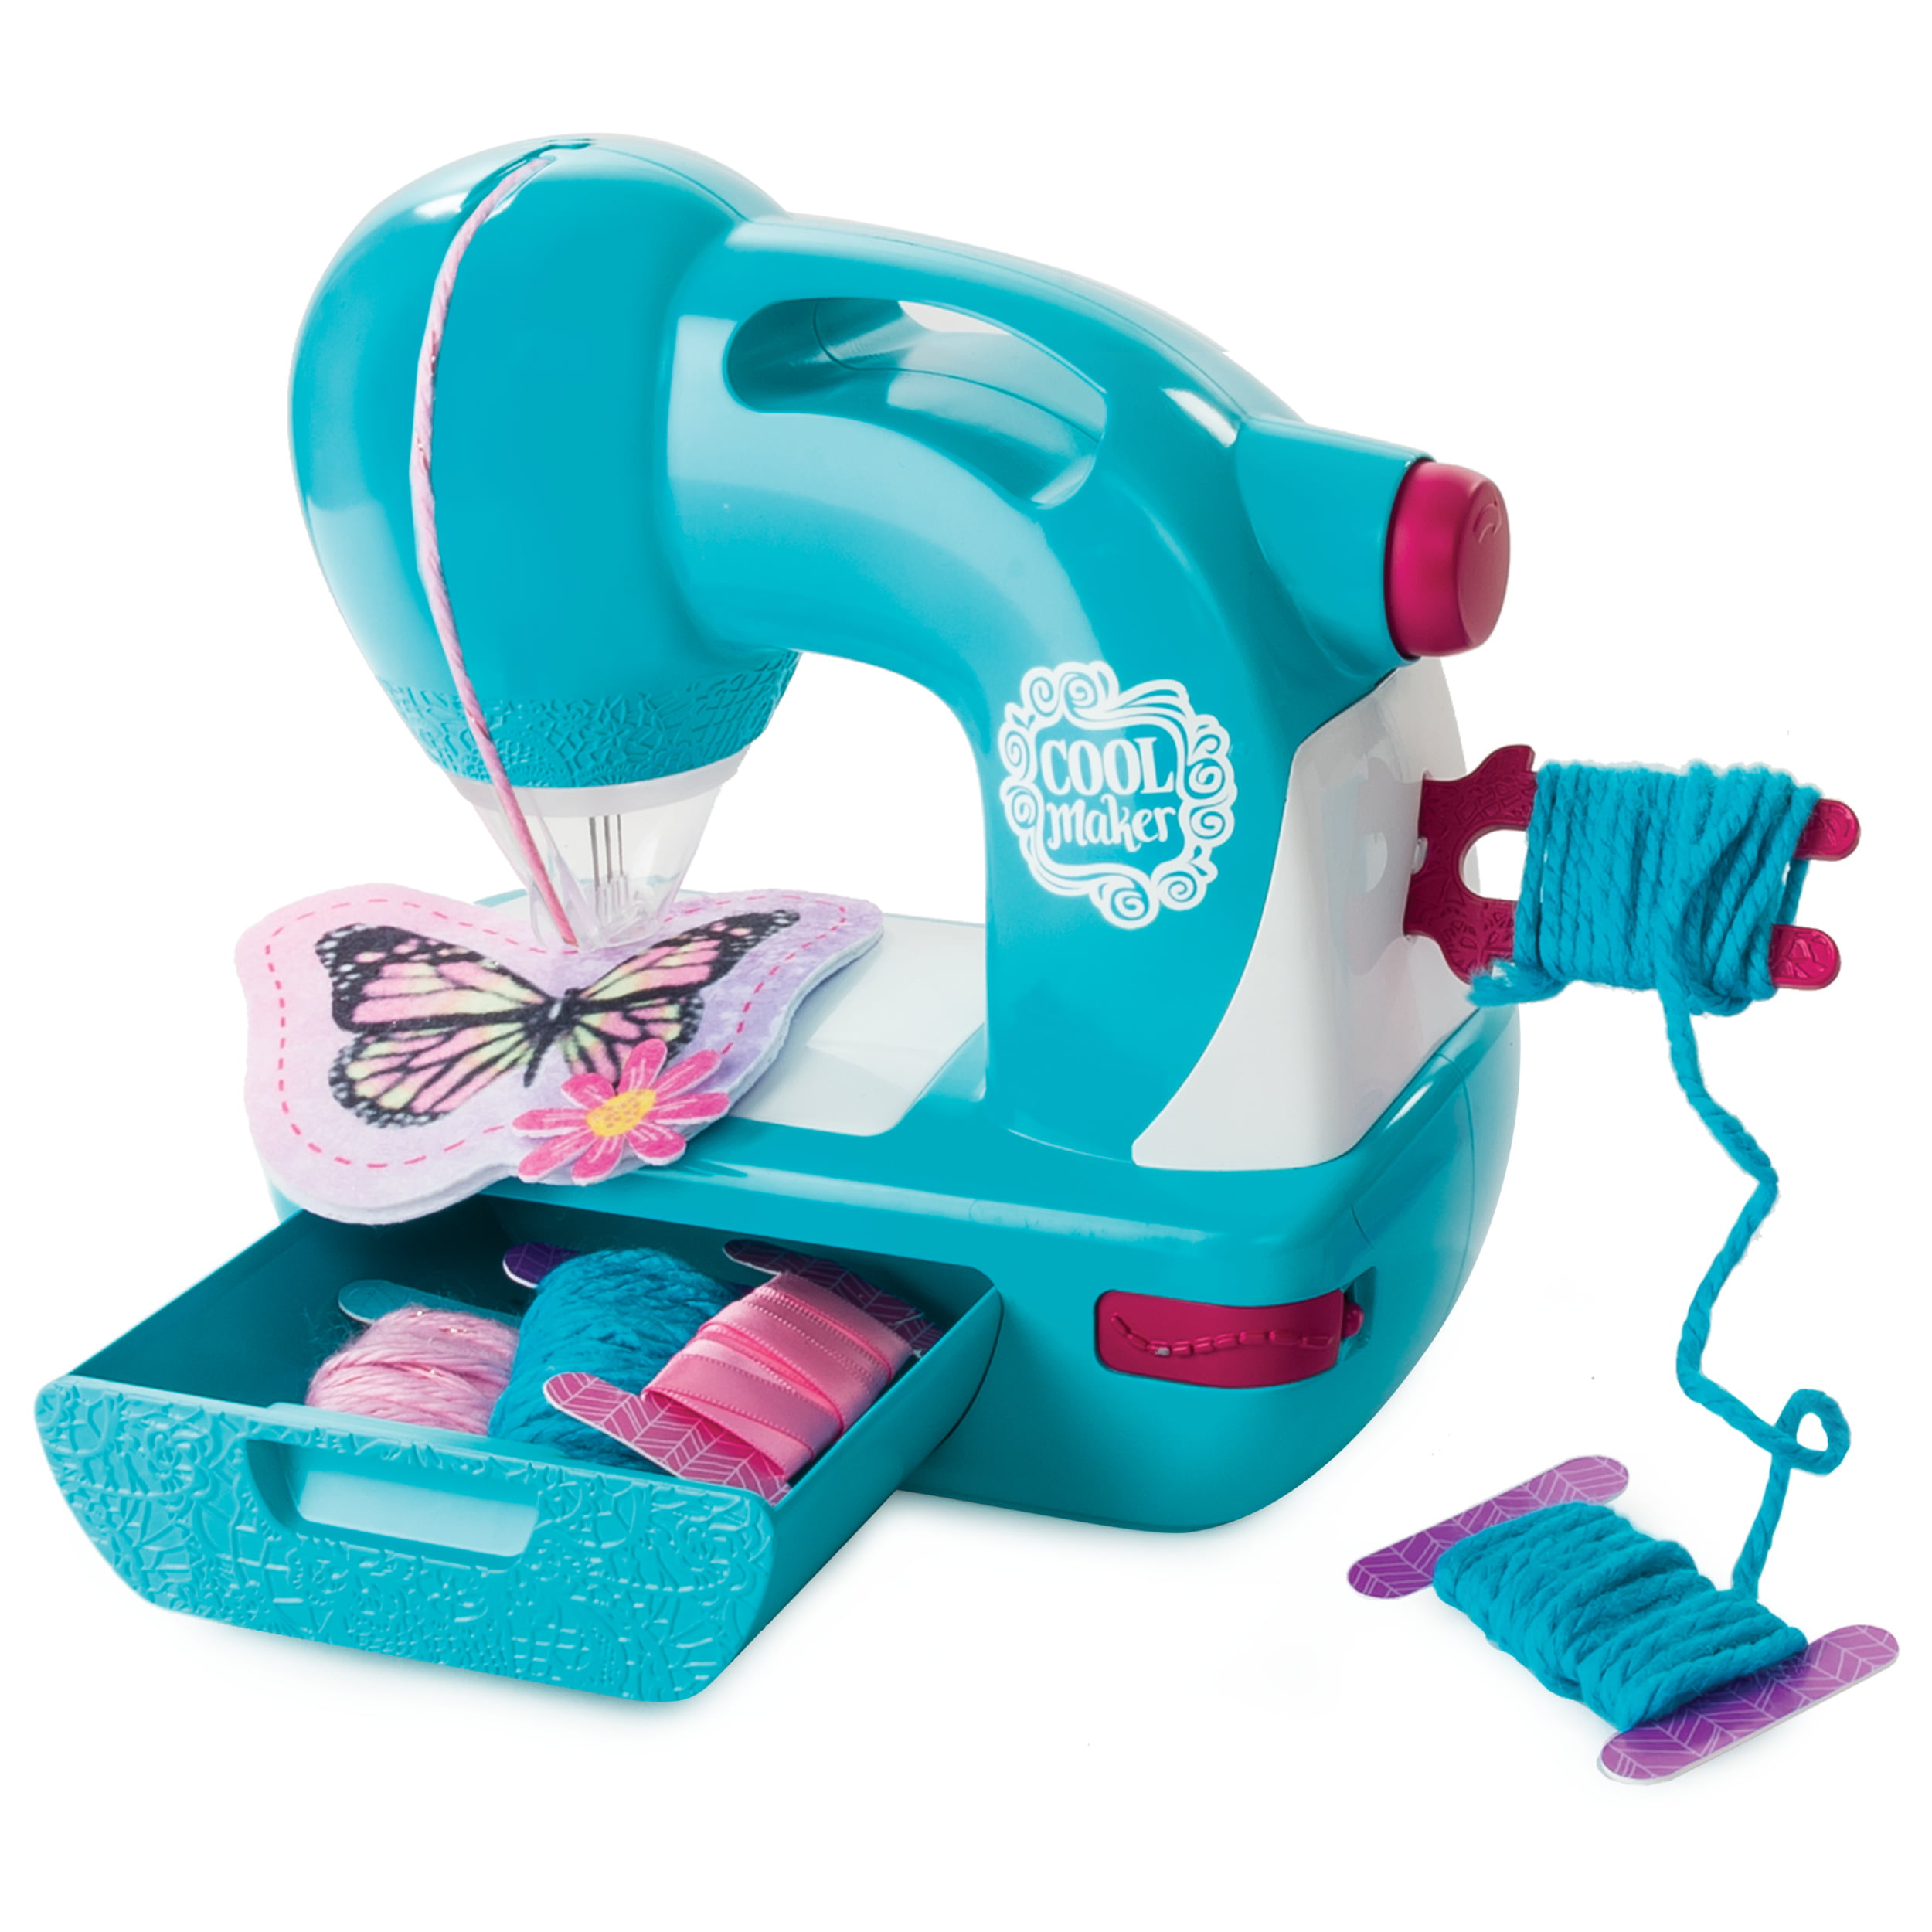 Encourage Creativity with the Spin Master Sew Cool Sewing Machine for Kids  at Walmart! - About a Mom